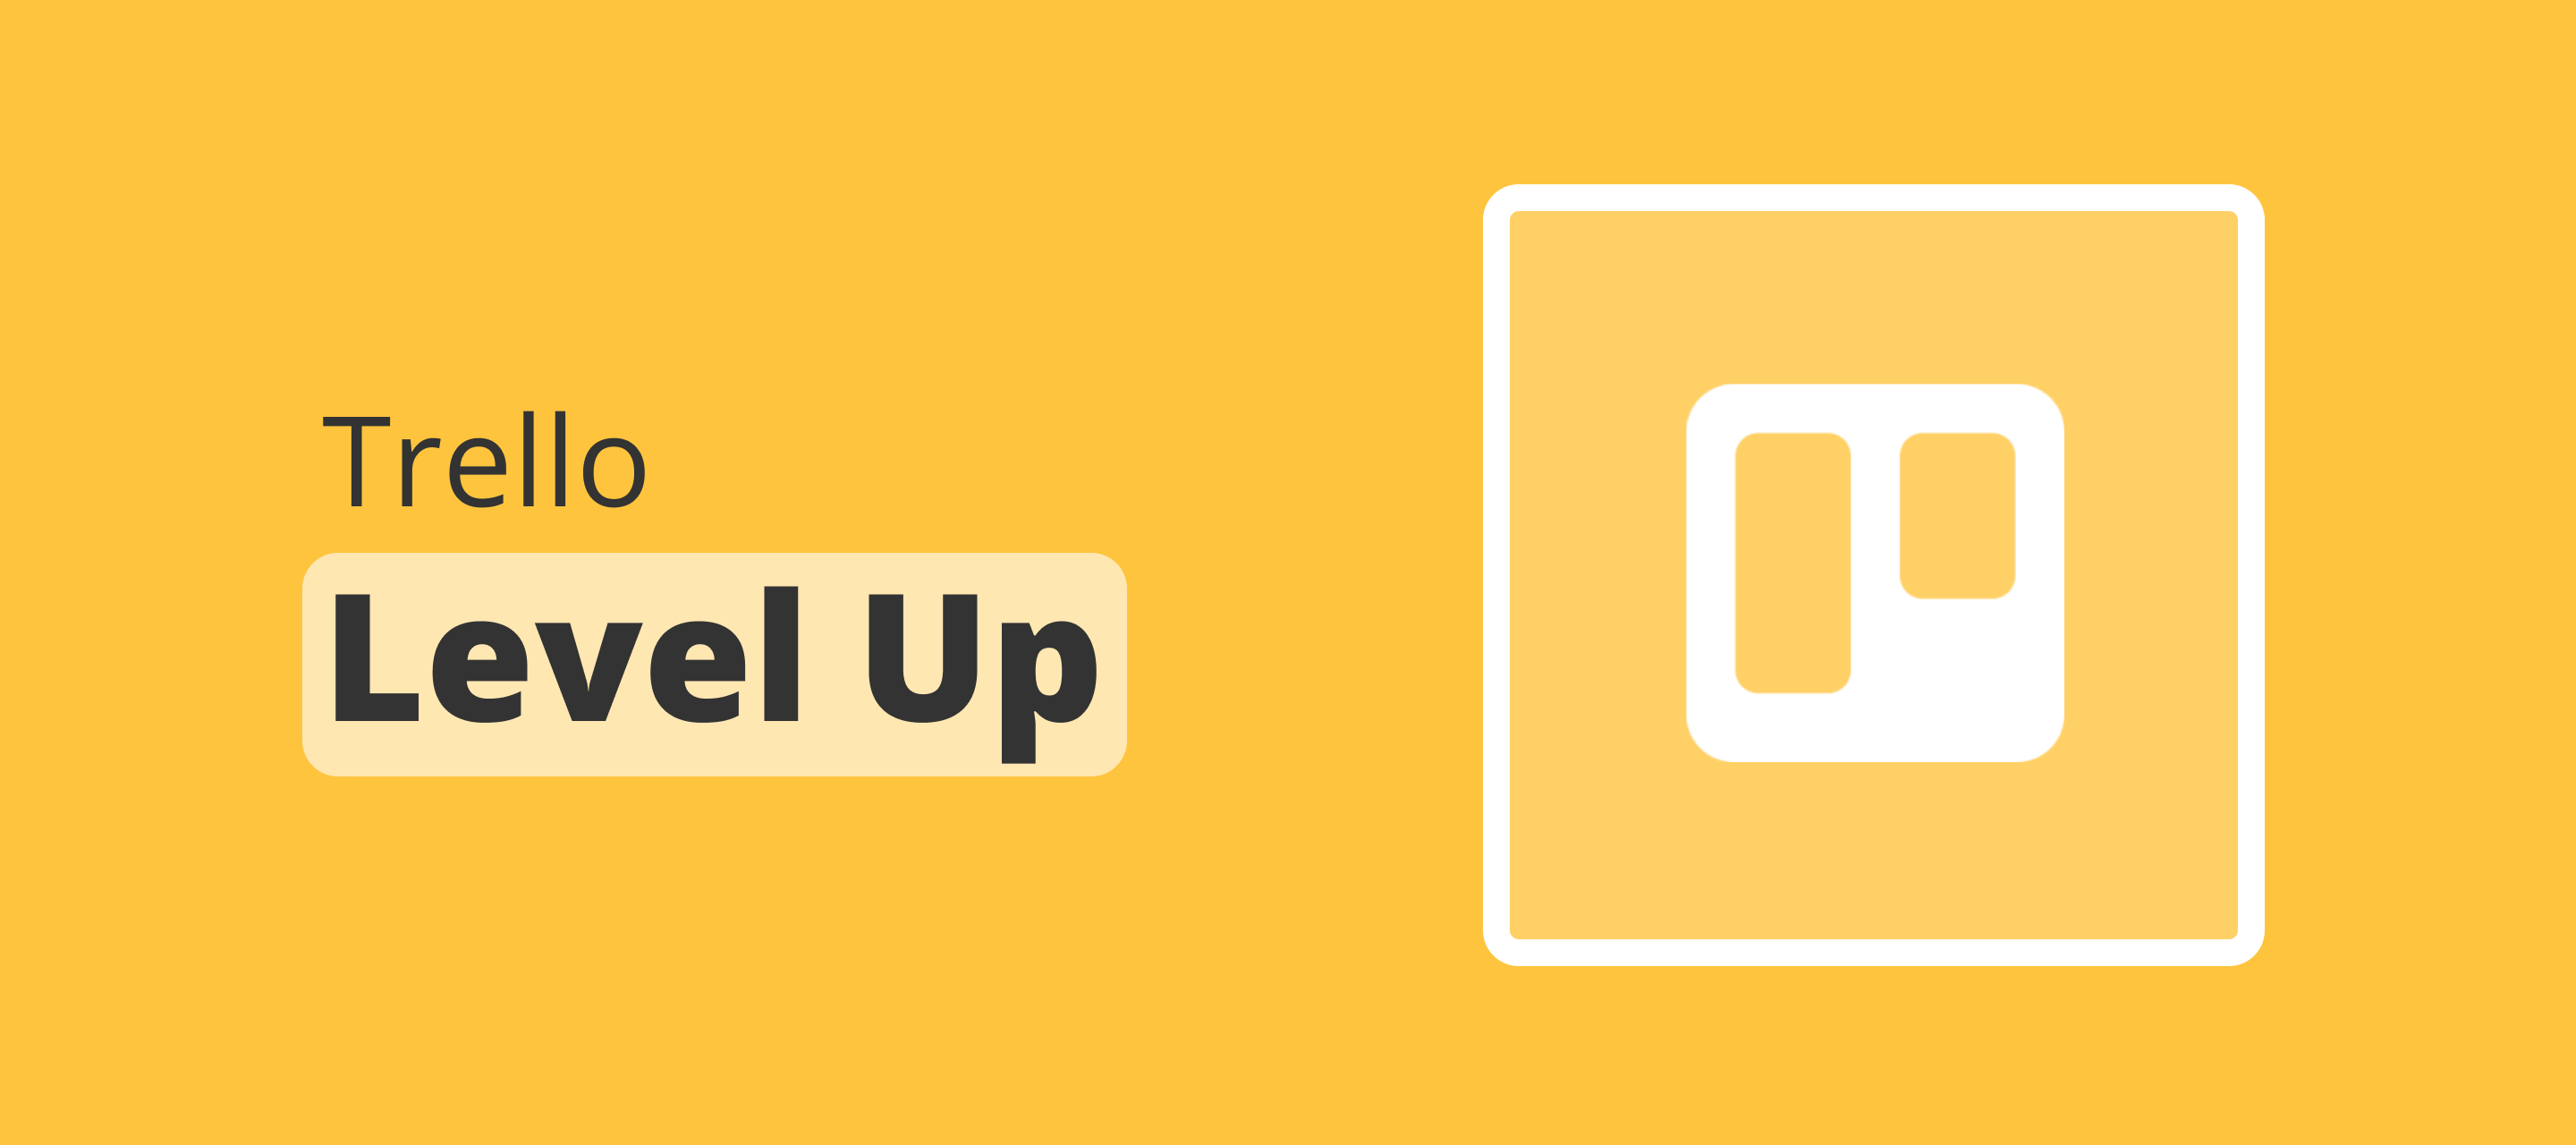 5 tips to level up your Trello experience with Zapier